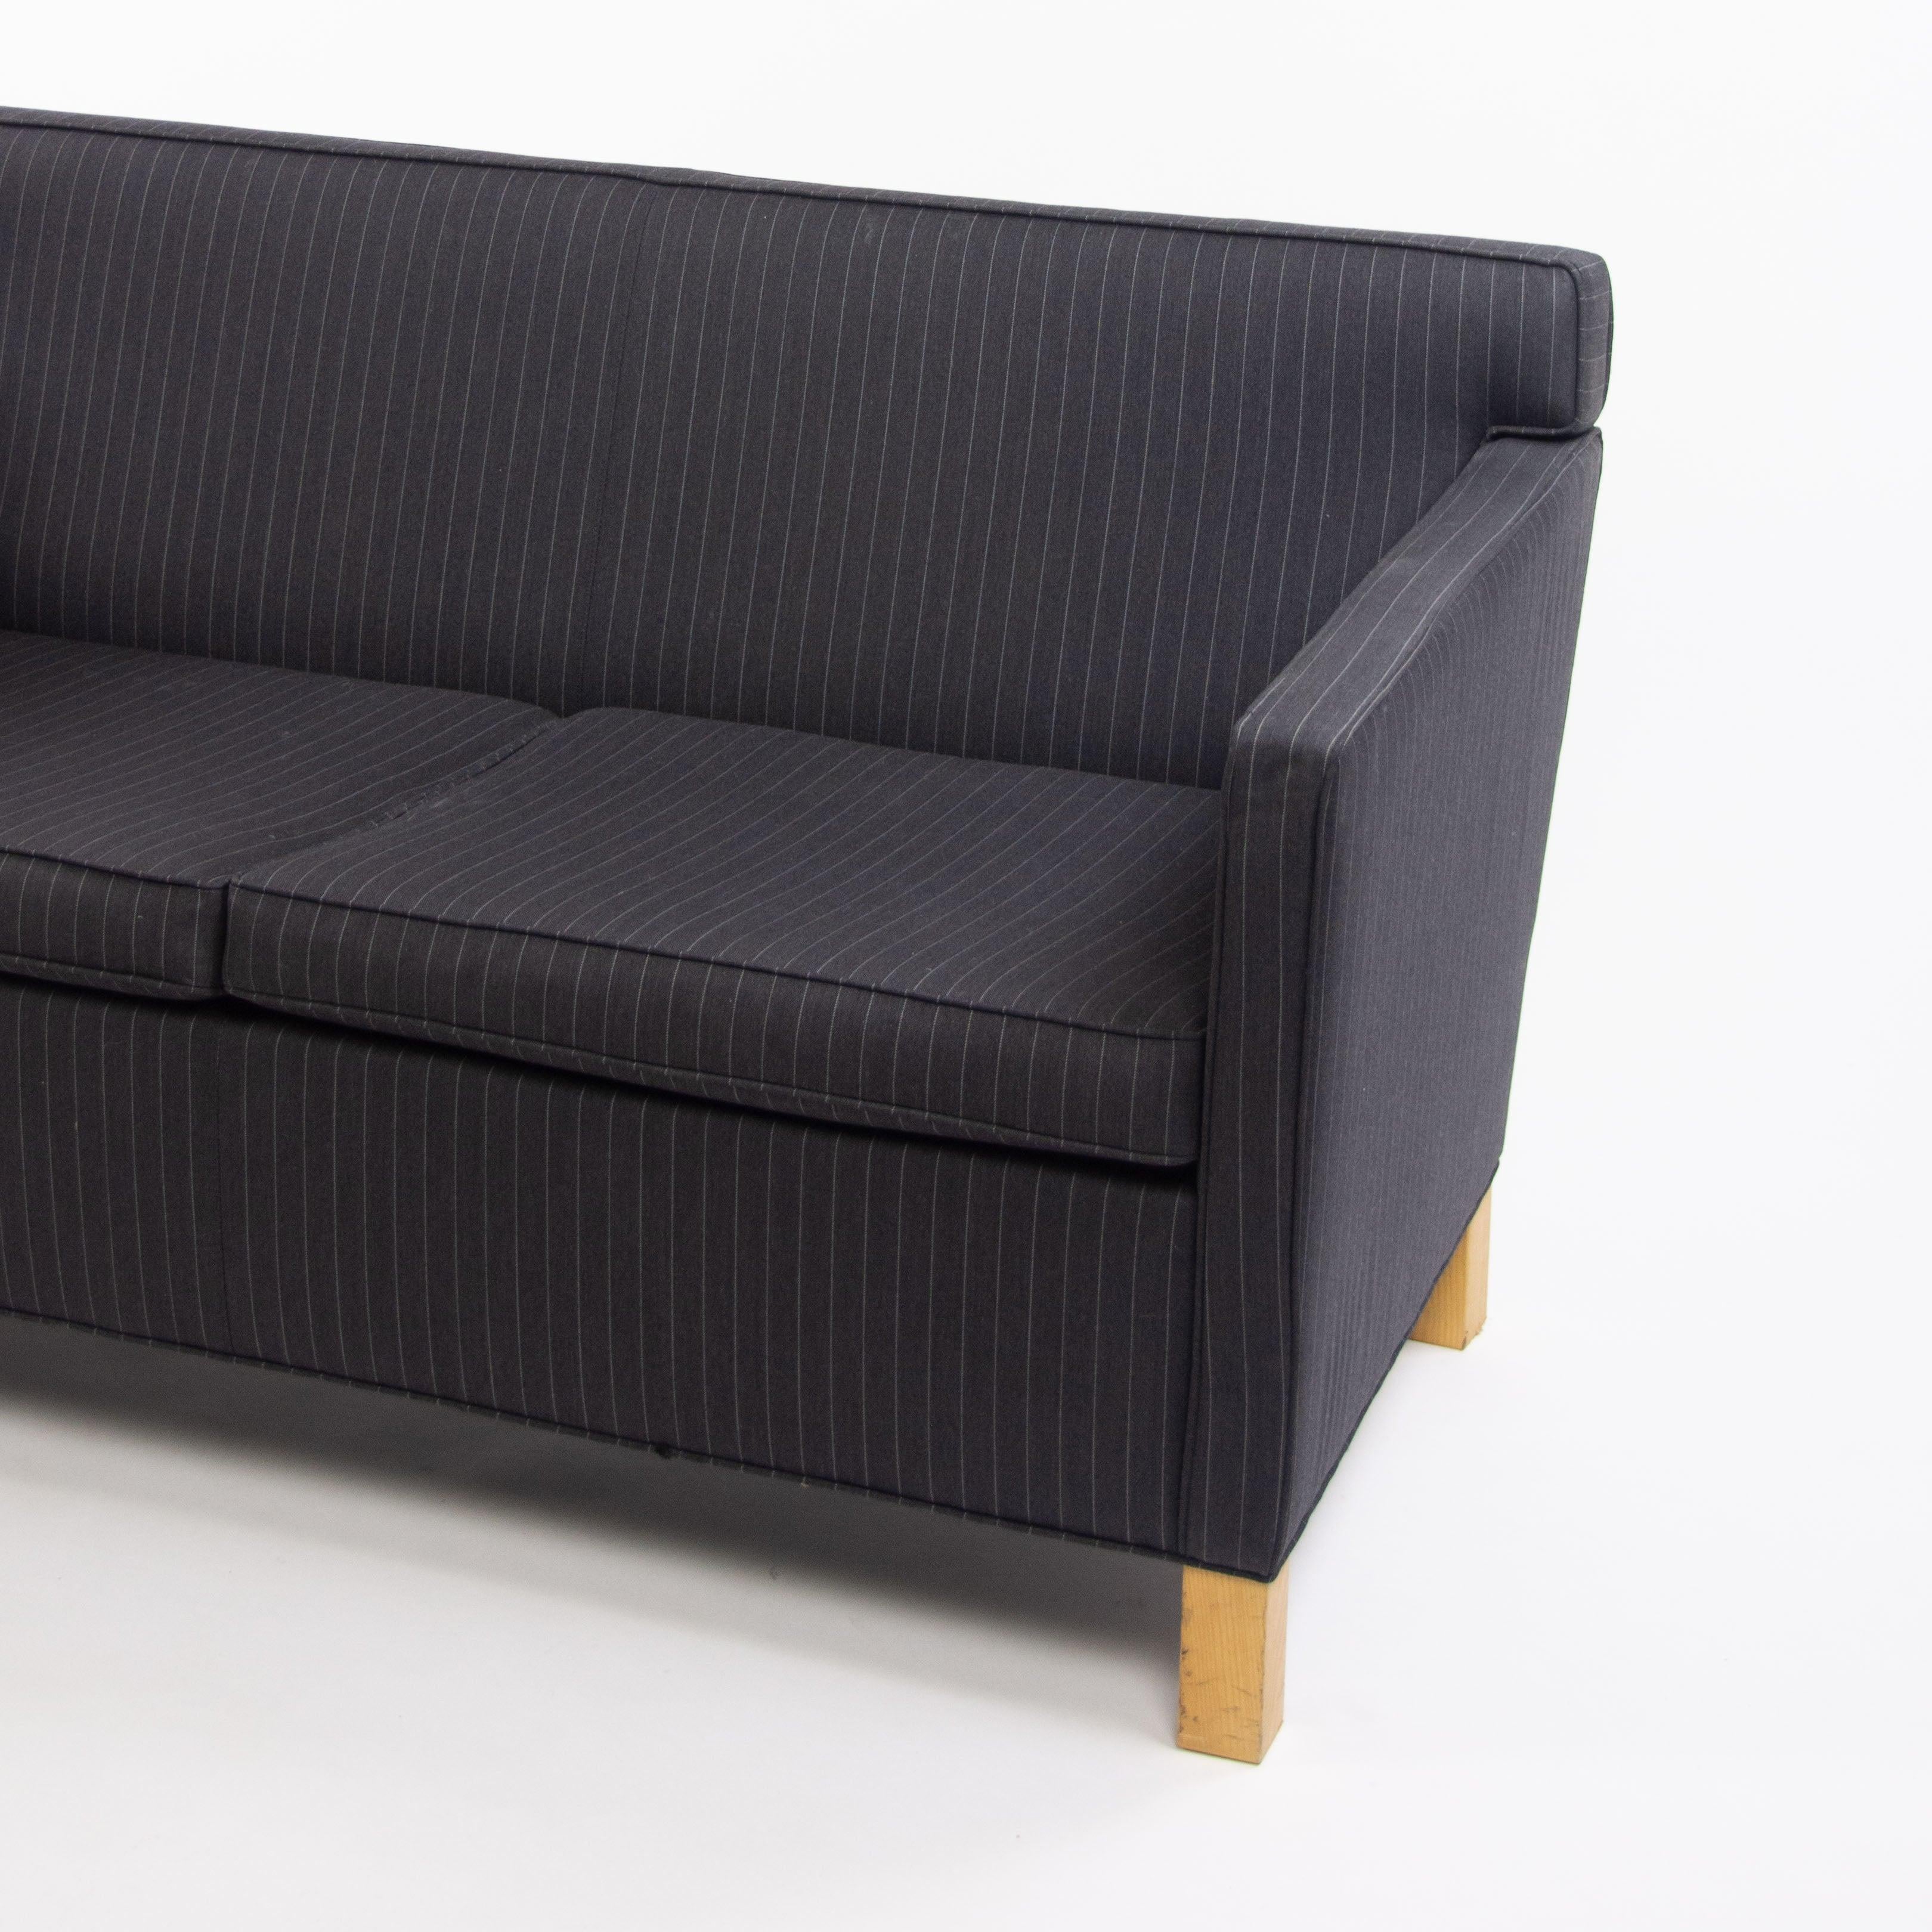 Modern 2010's Knoll Mies Van Der Rohe Krefeld Loveseat Sofa Fabric Sets Available For Sale